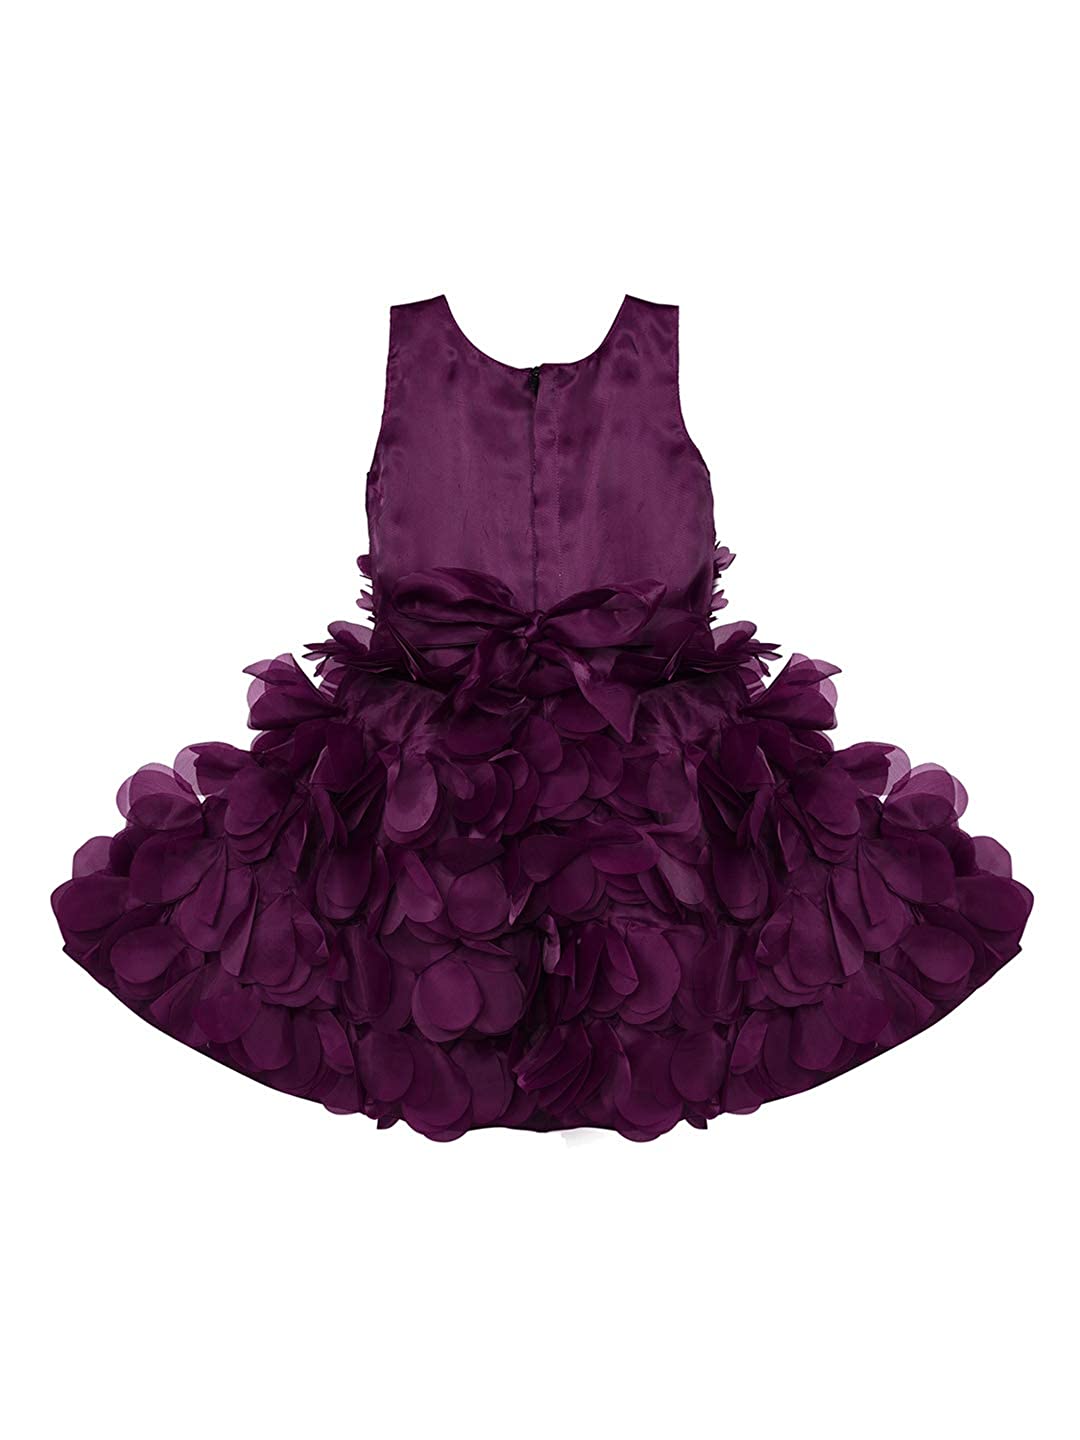 Baby Girls Party Wear Frock Birthday Dress For Girls bxa165ppl - Wish Karo Party Wear - frocks Party Wear - baby dress